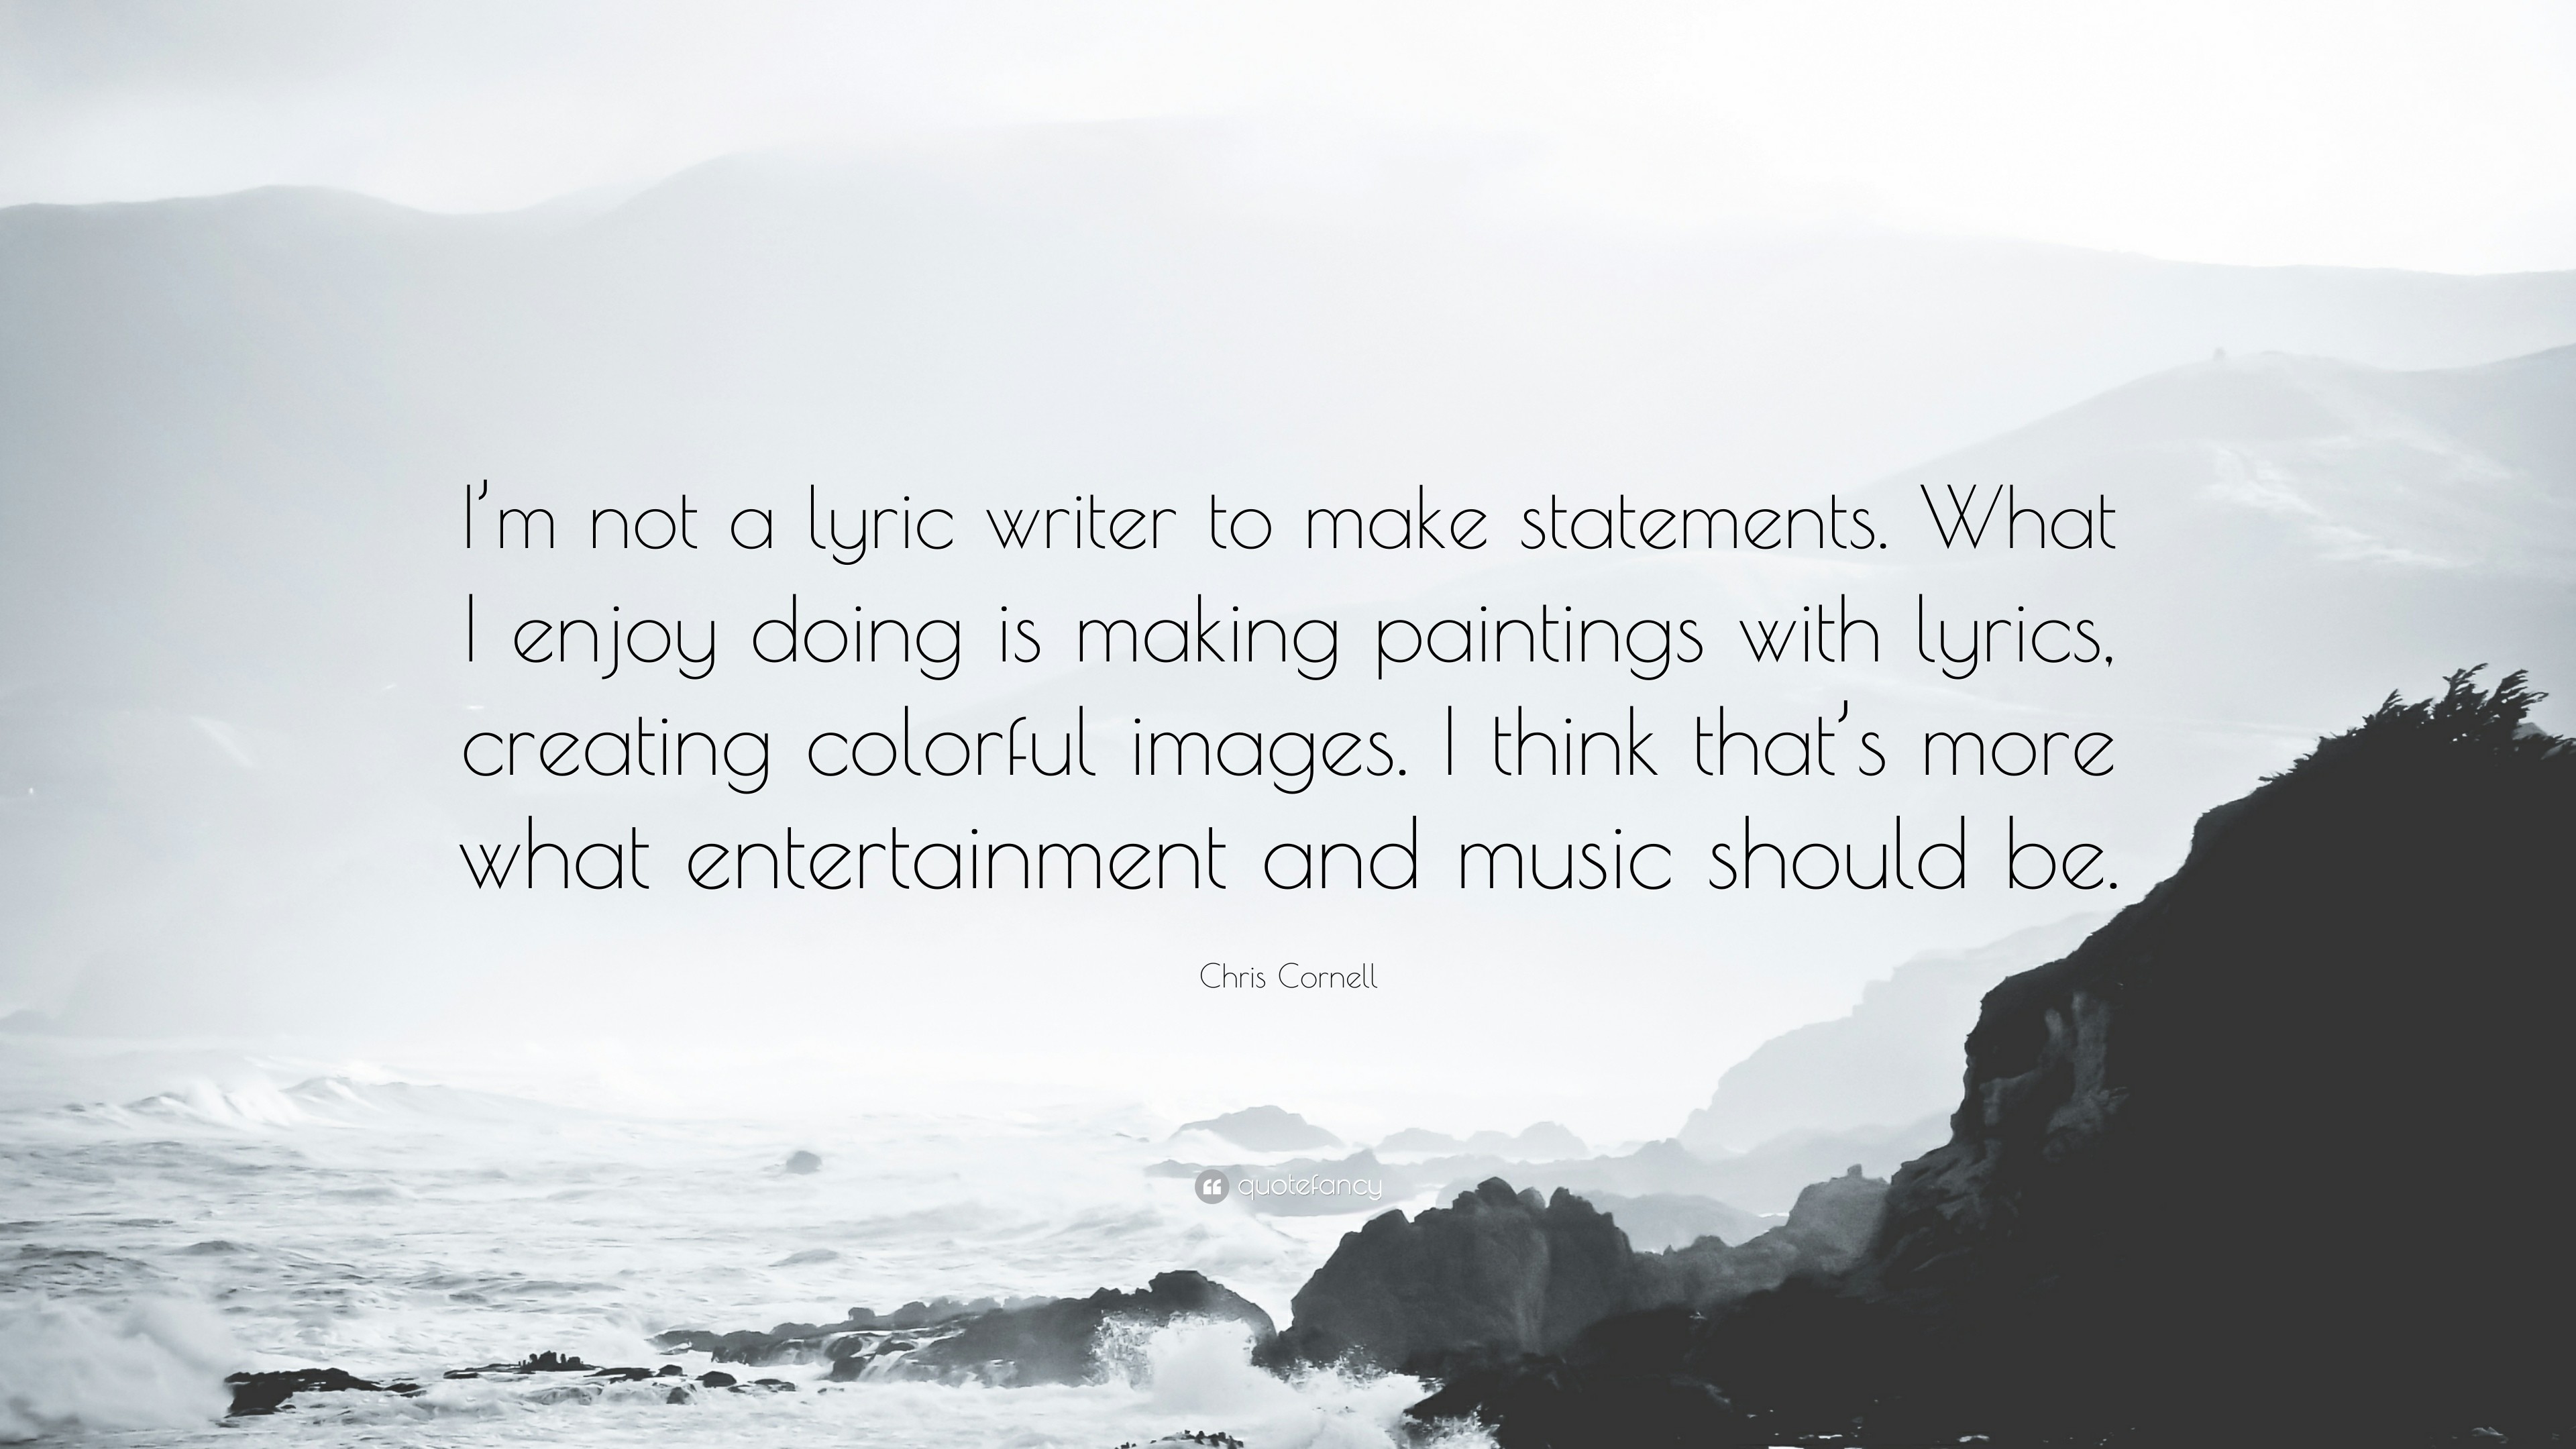 3840x2160 Chris Cornell Quote: “I'm not a lyric writer to make statements.